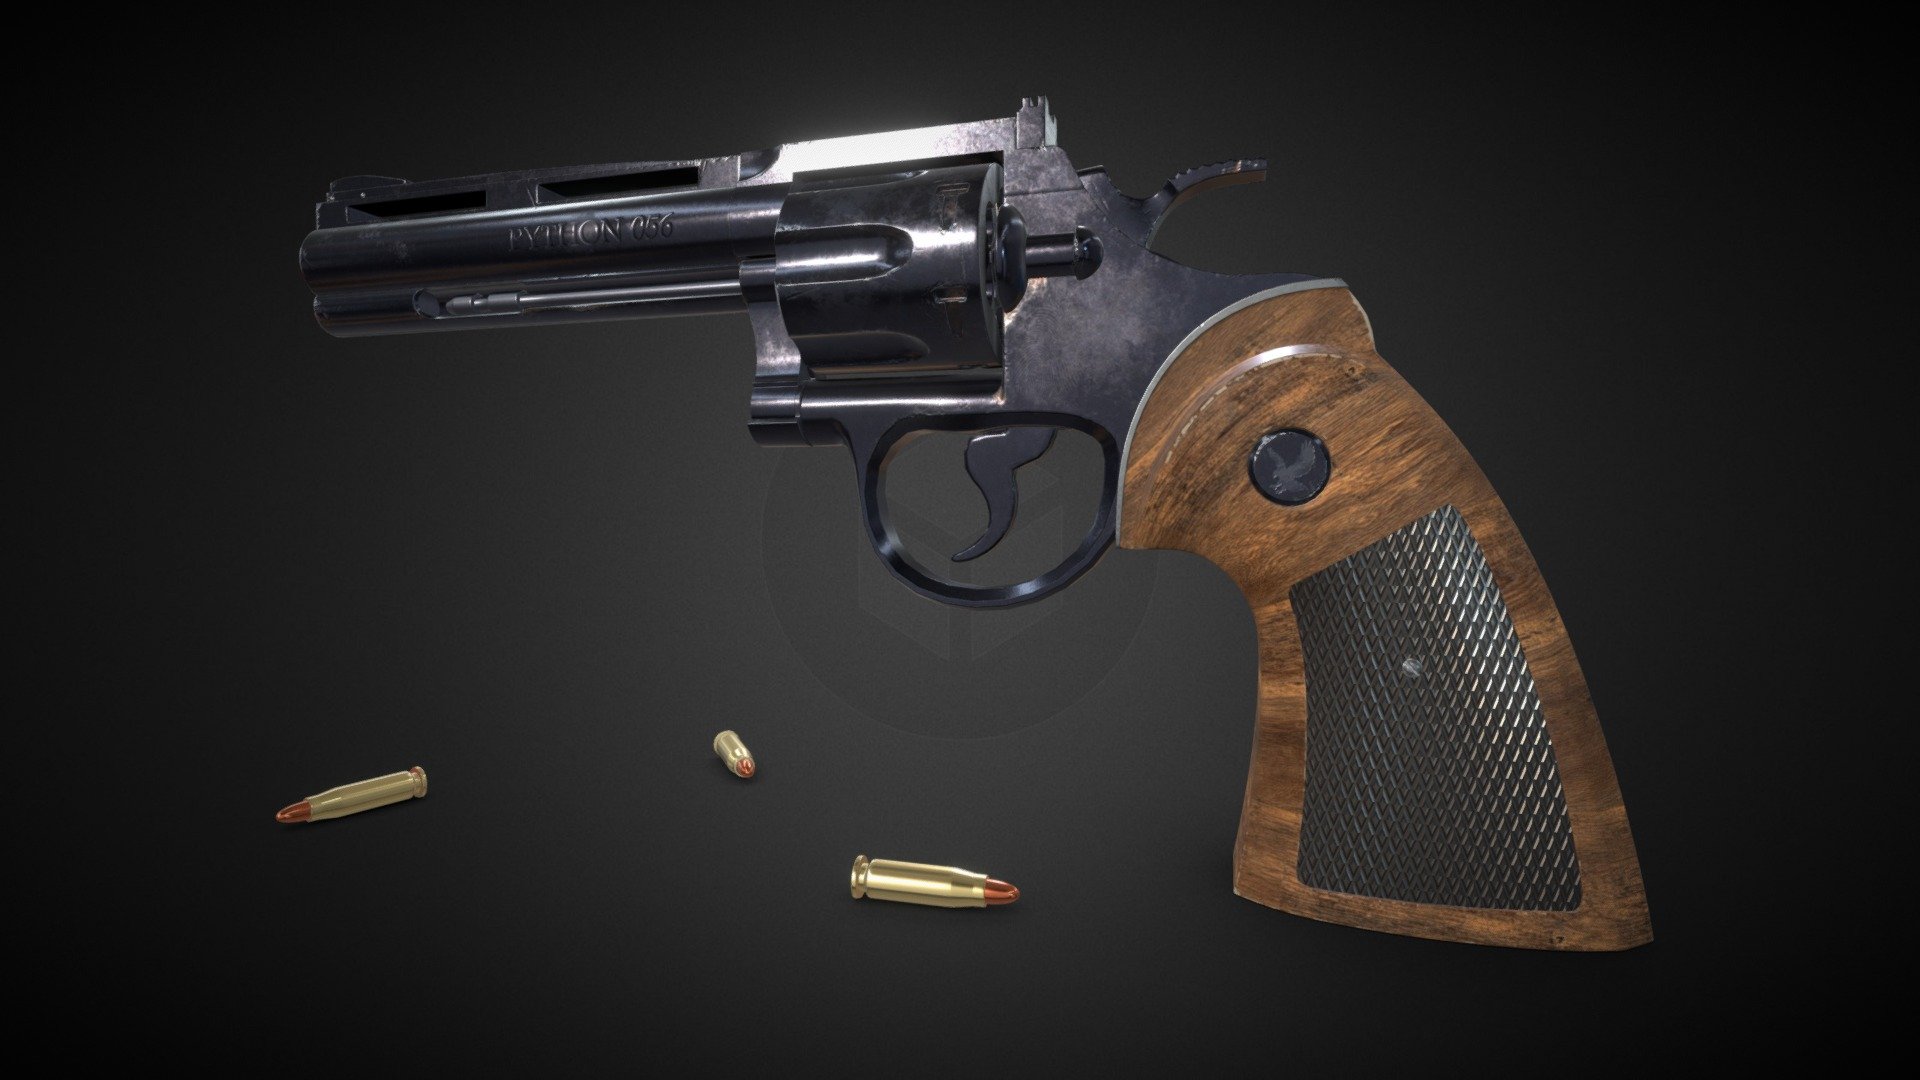 CG Revolver 
Available for purchase on the BlenderMarket. http://cgcookiemarkets.com/blender/all-products/cg-revolver/

Made with Blender | Substance Painter - CG Revolver | PBR Render - 3D model by Luca Scheller (@luca-scheller) 3d model